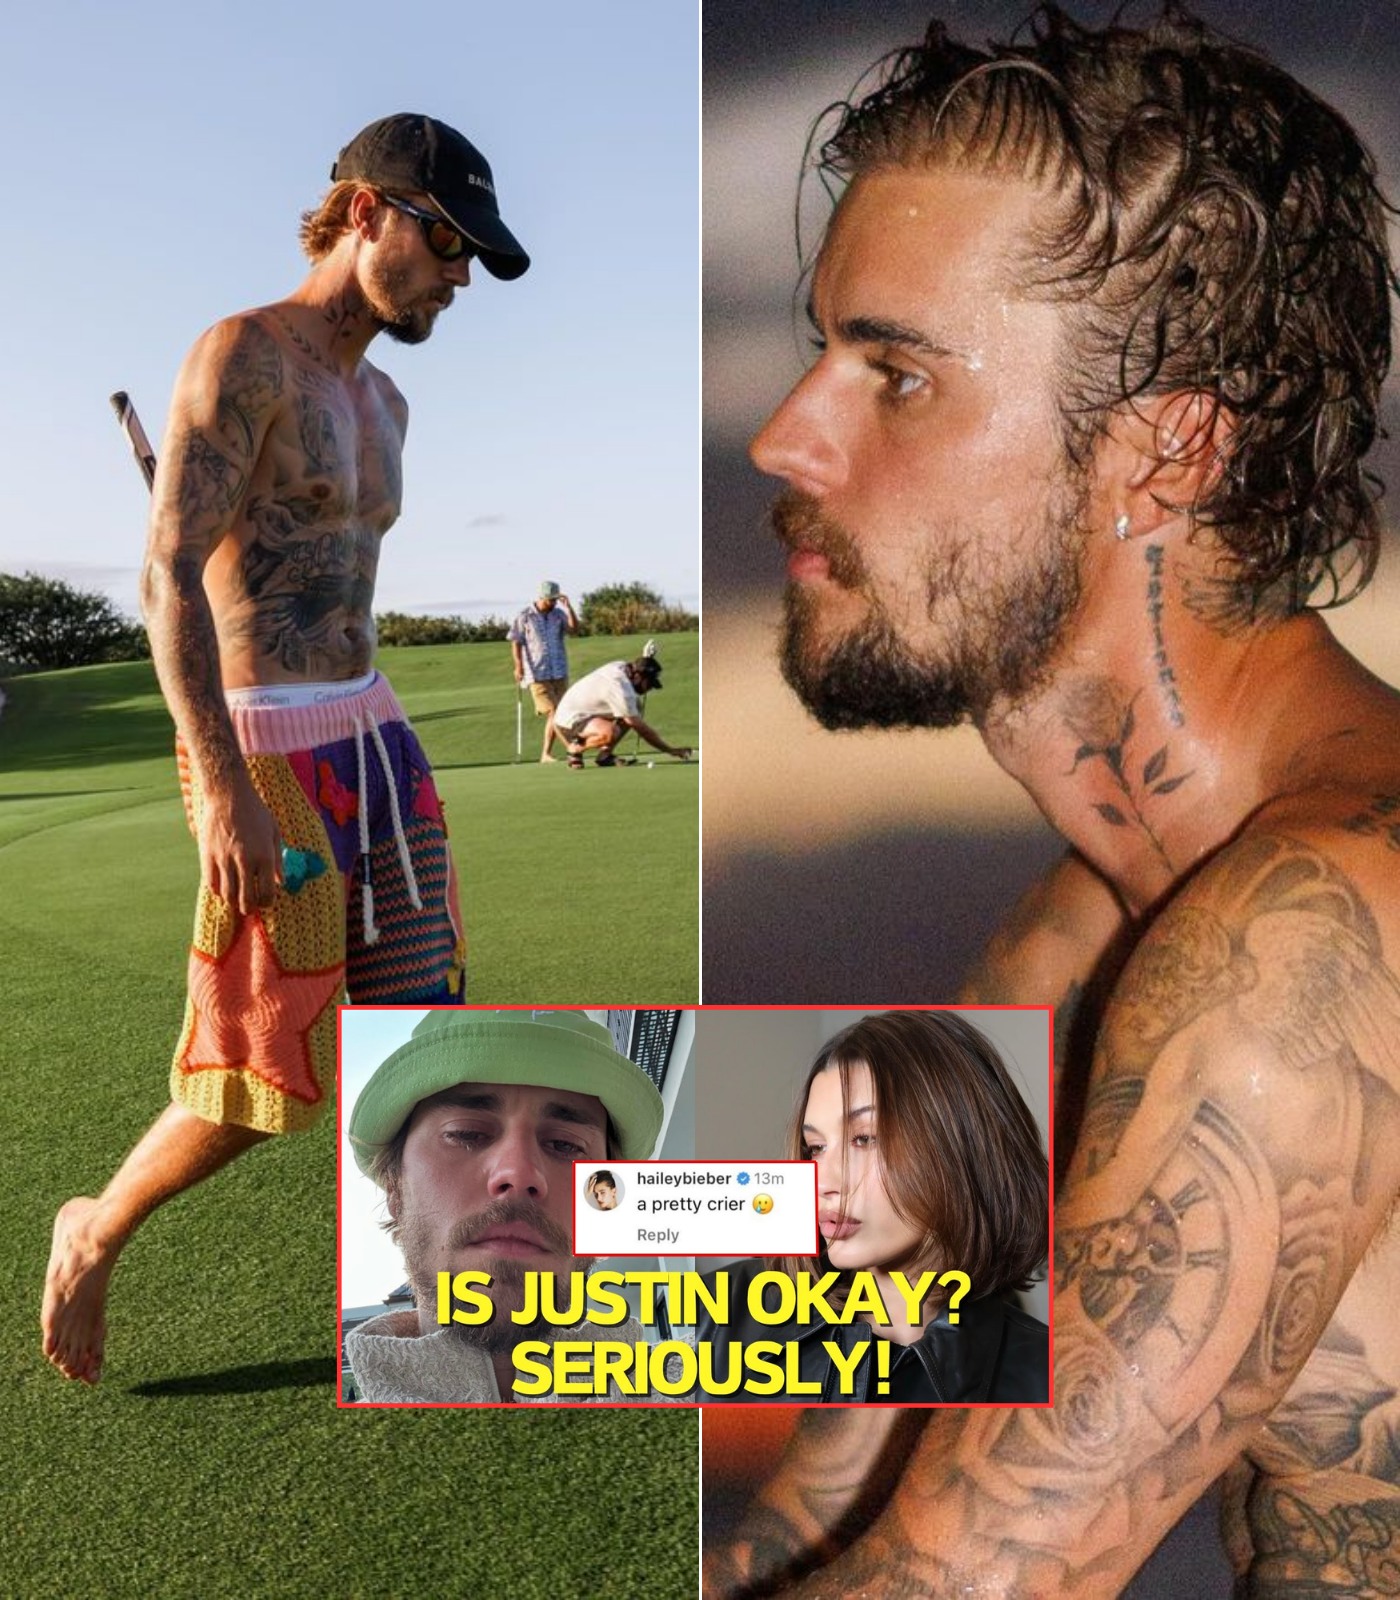 Justin Bieber crying a lot and lonely in new photos and why?? Find out here…